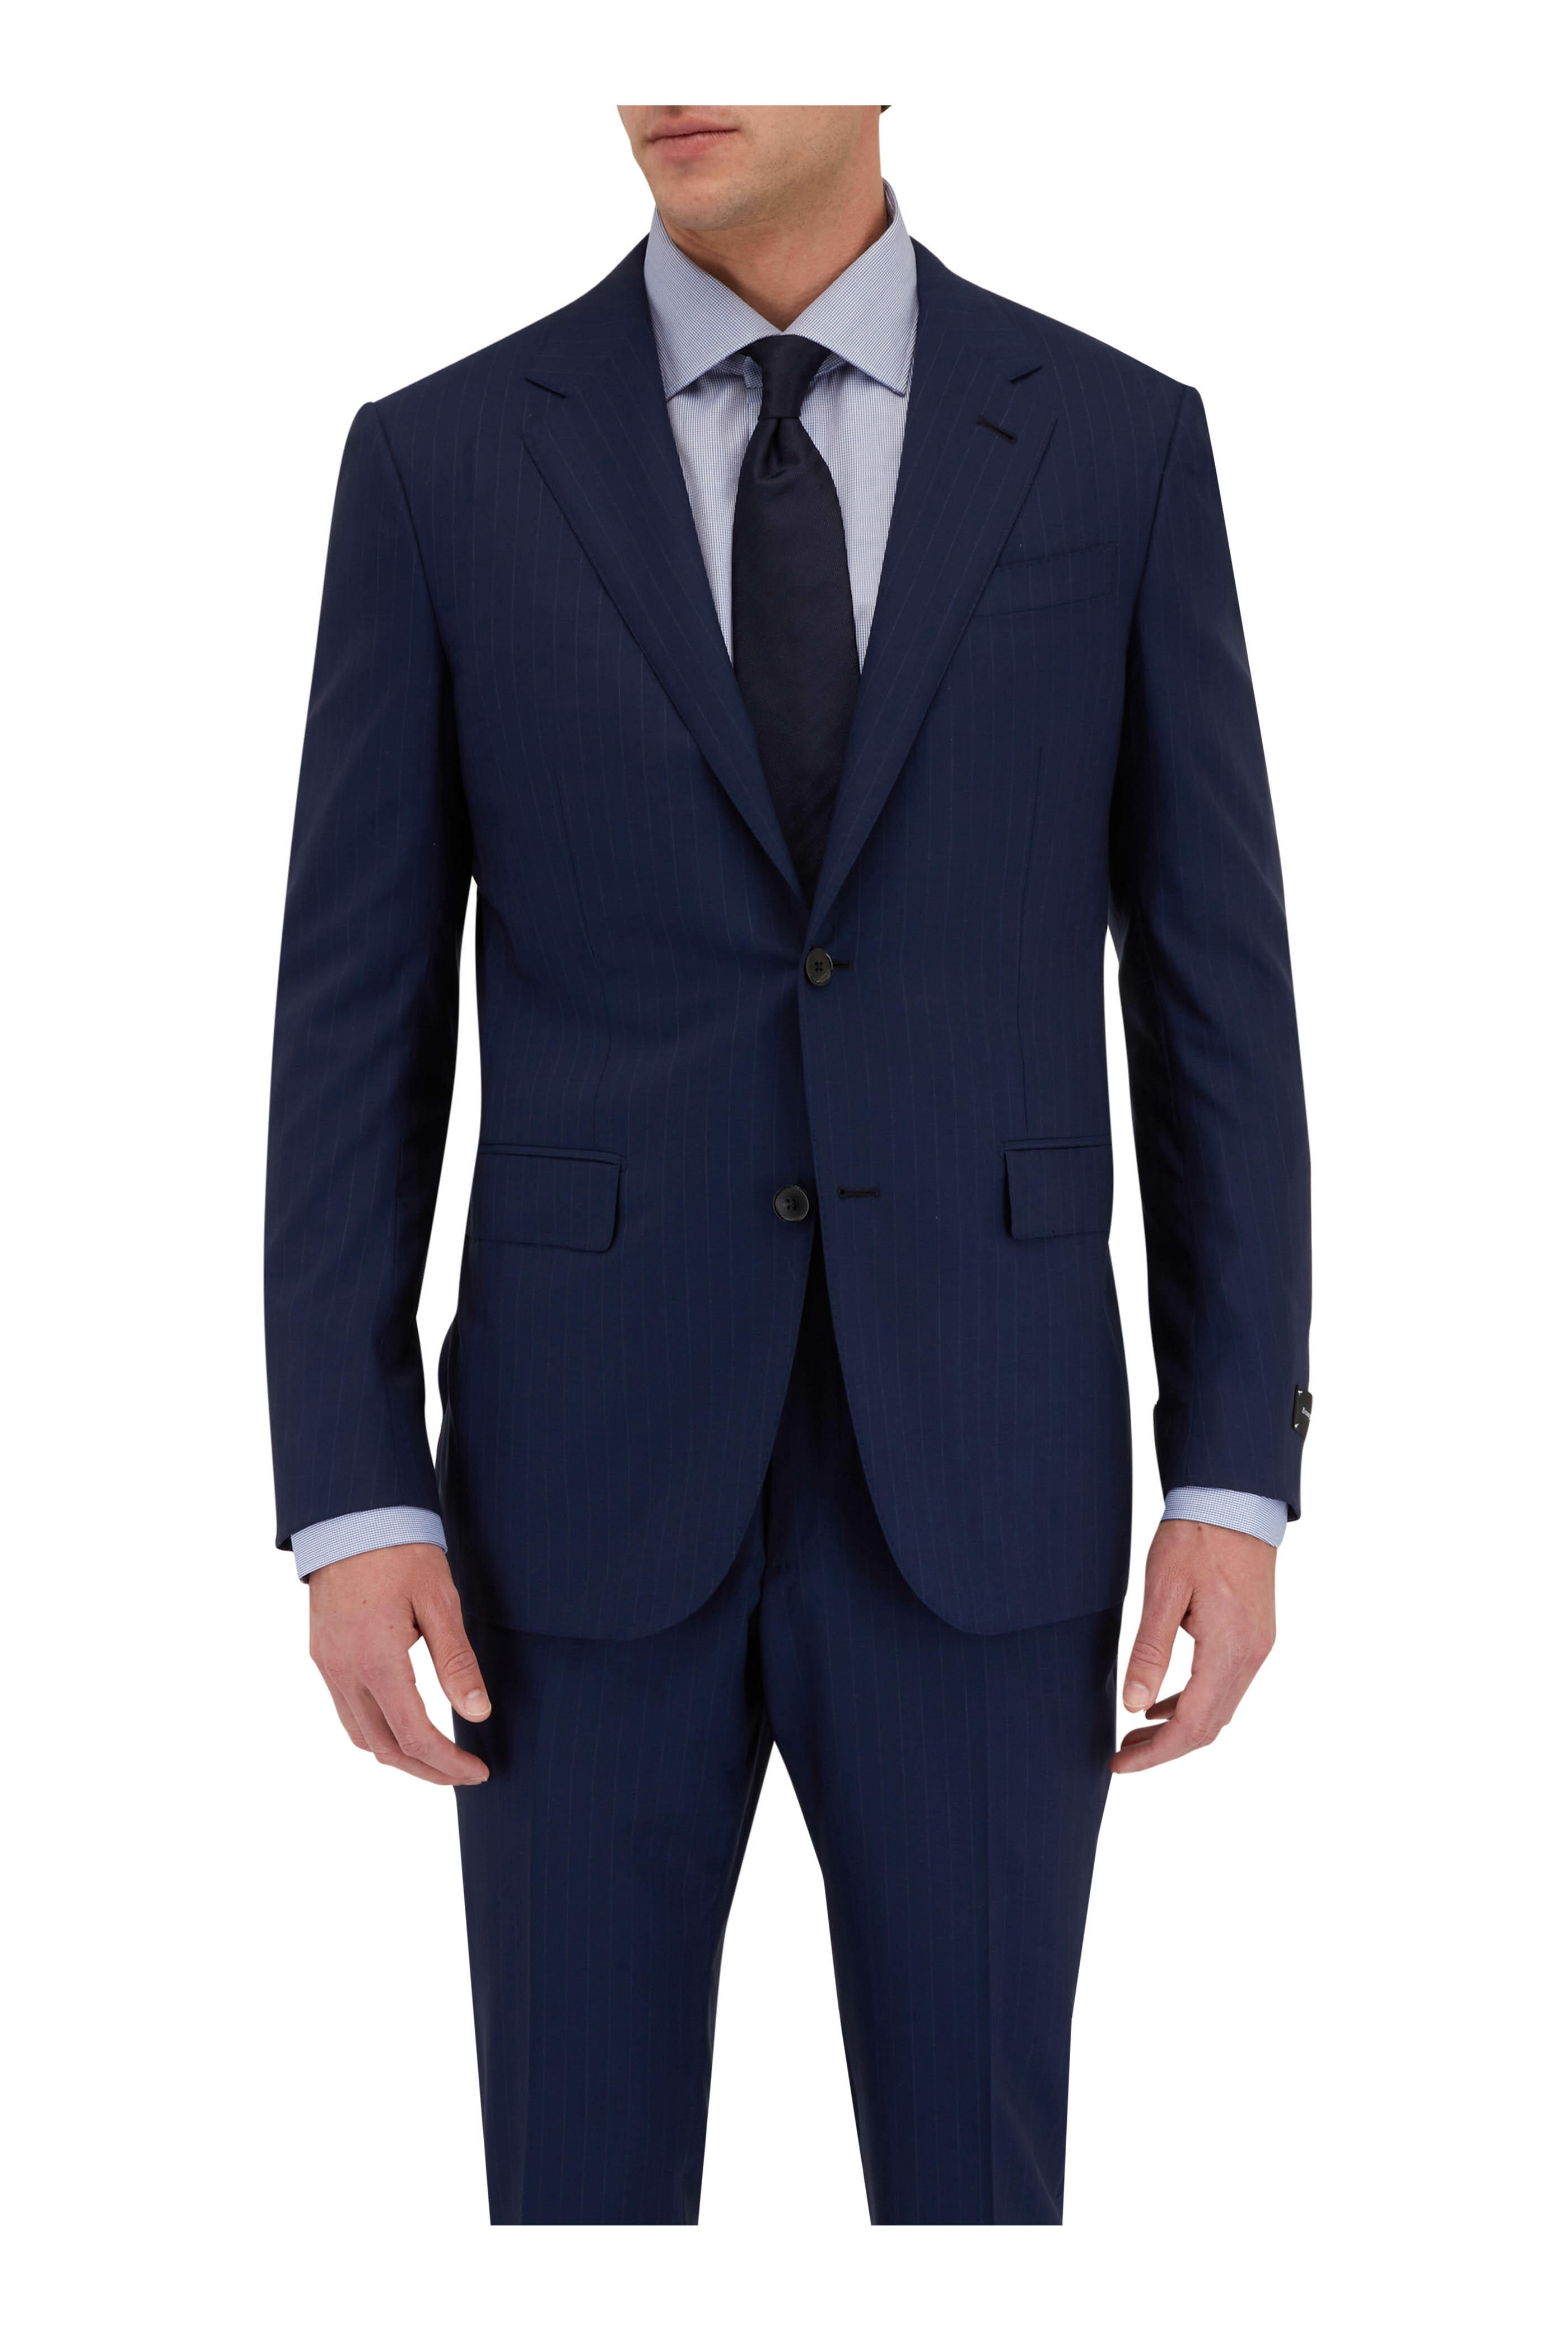 Zegna - 14 Milmil 14 Navy Striped Wool Suit | Mitchell Stores